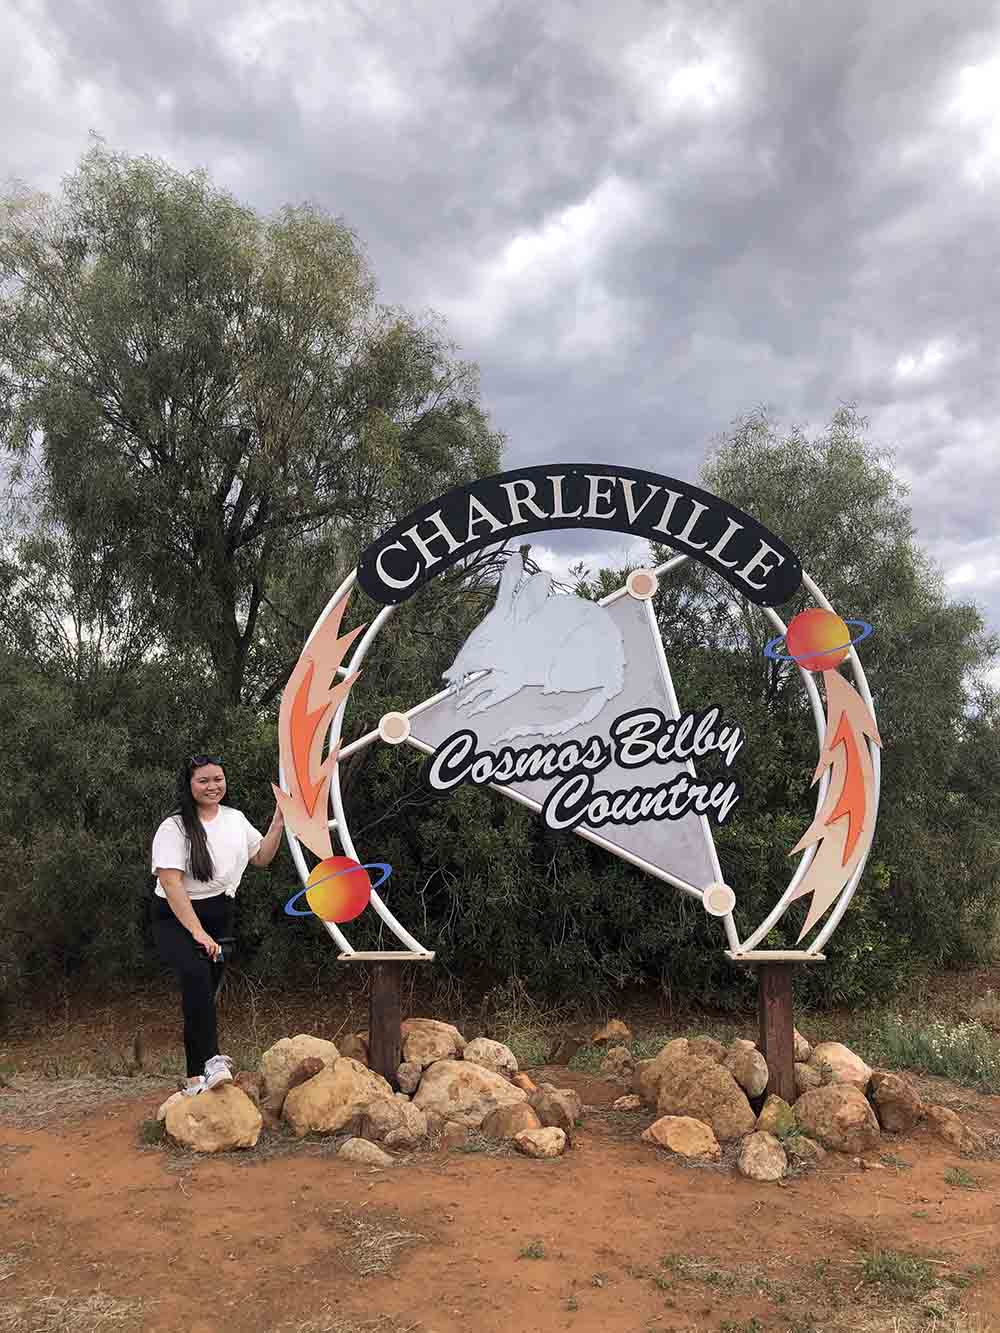 A woman stand in front of a sign reading 'Charleville - cosmos bilby country'.